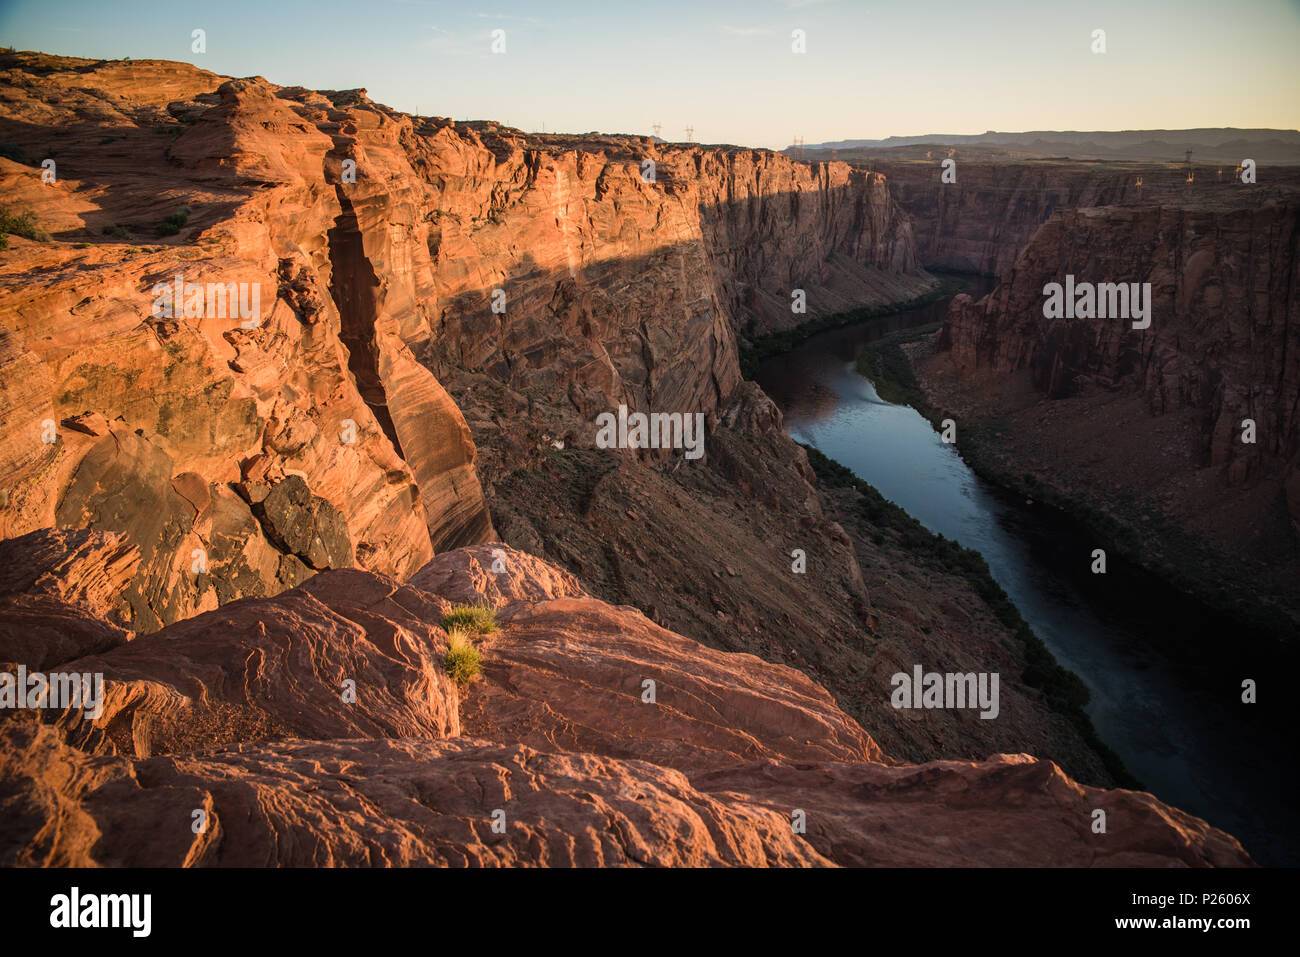 Landscape view of the Colorado River in Page, Arizona during sunset. Stock Photo